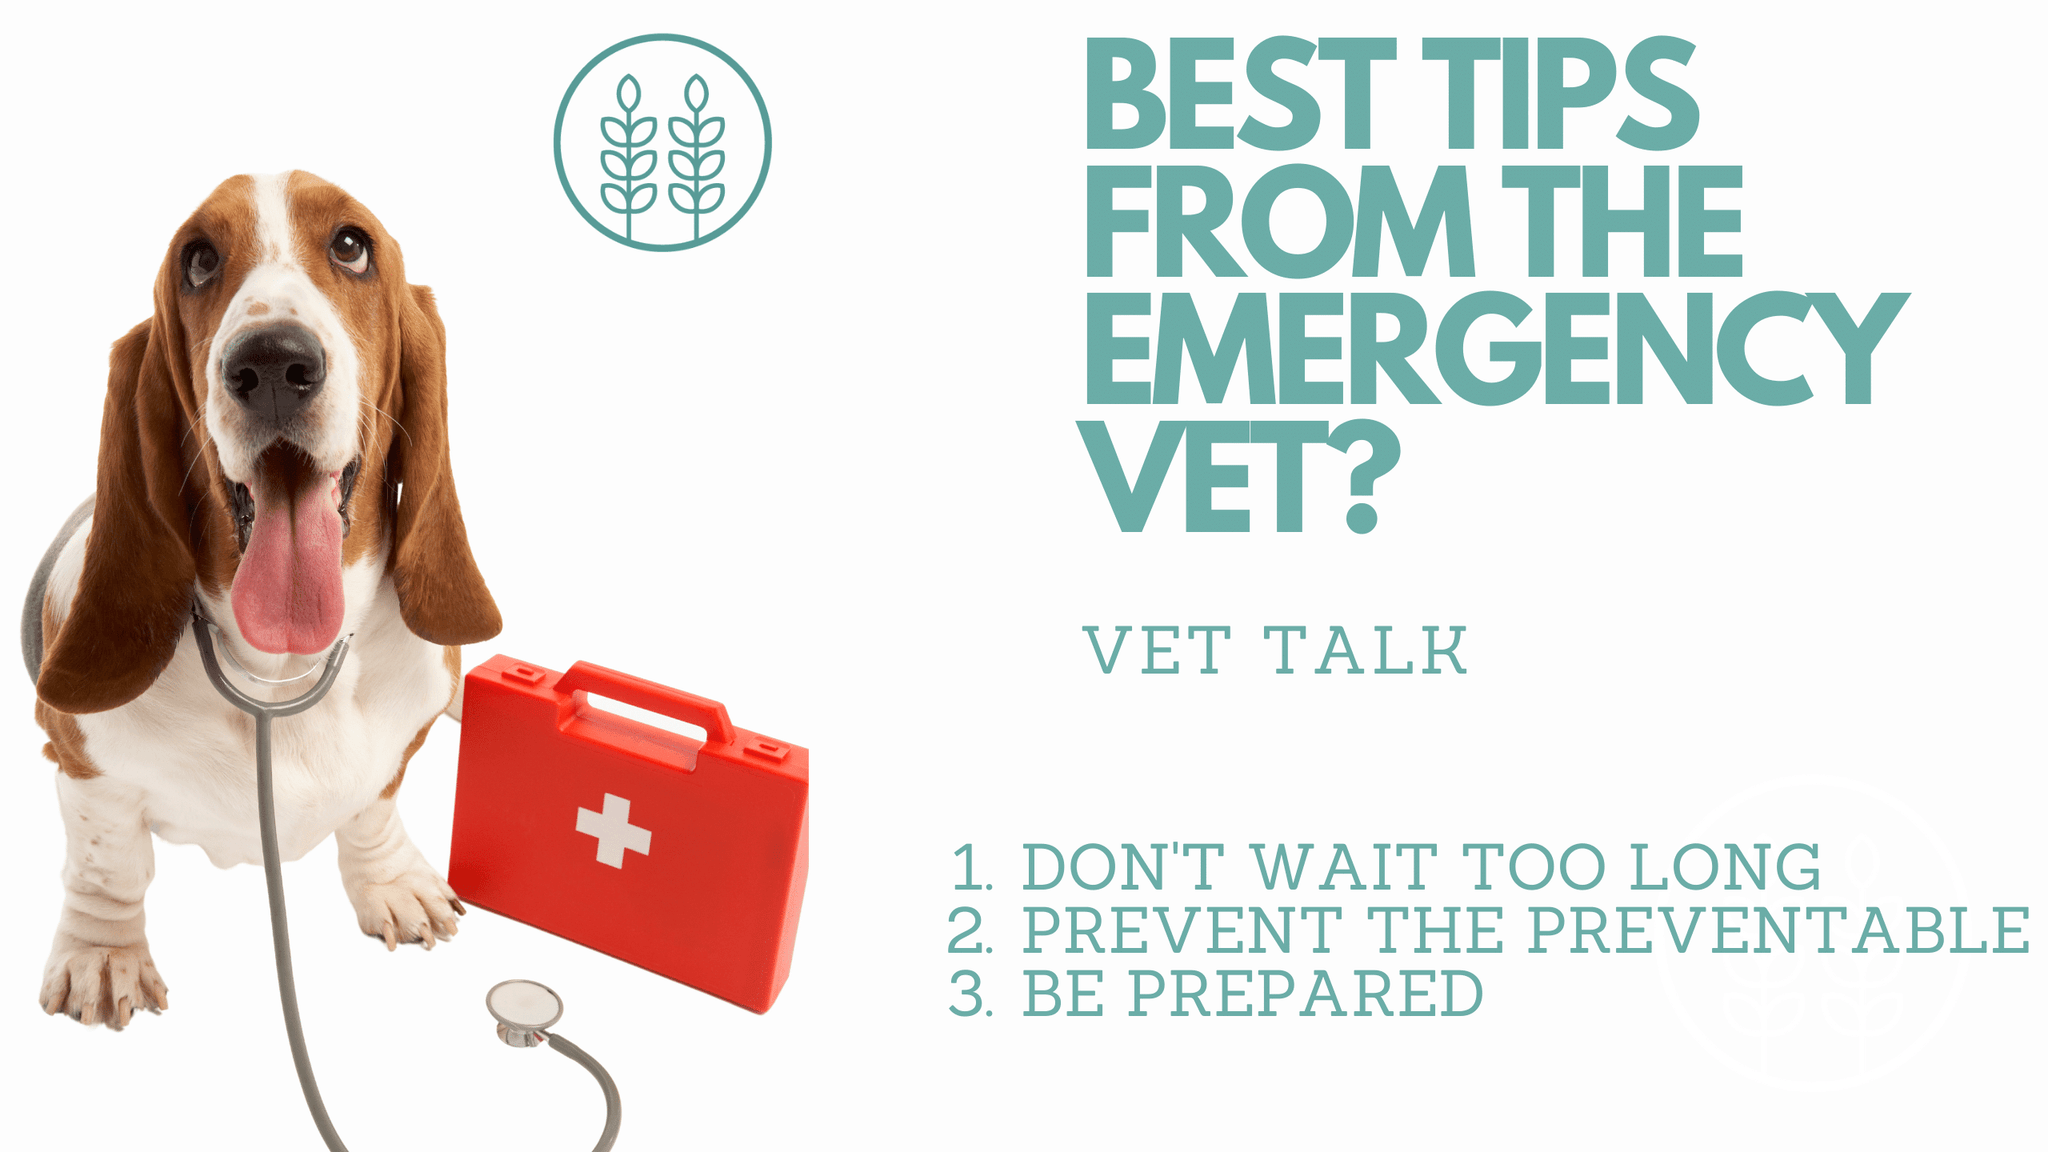 3 Tips From The Emergency Vet That Could Save Your Pet's Life